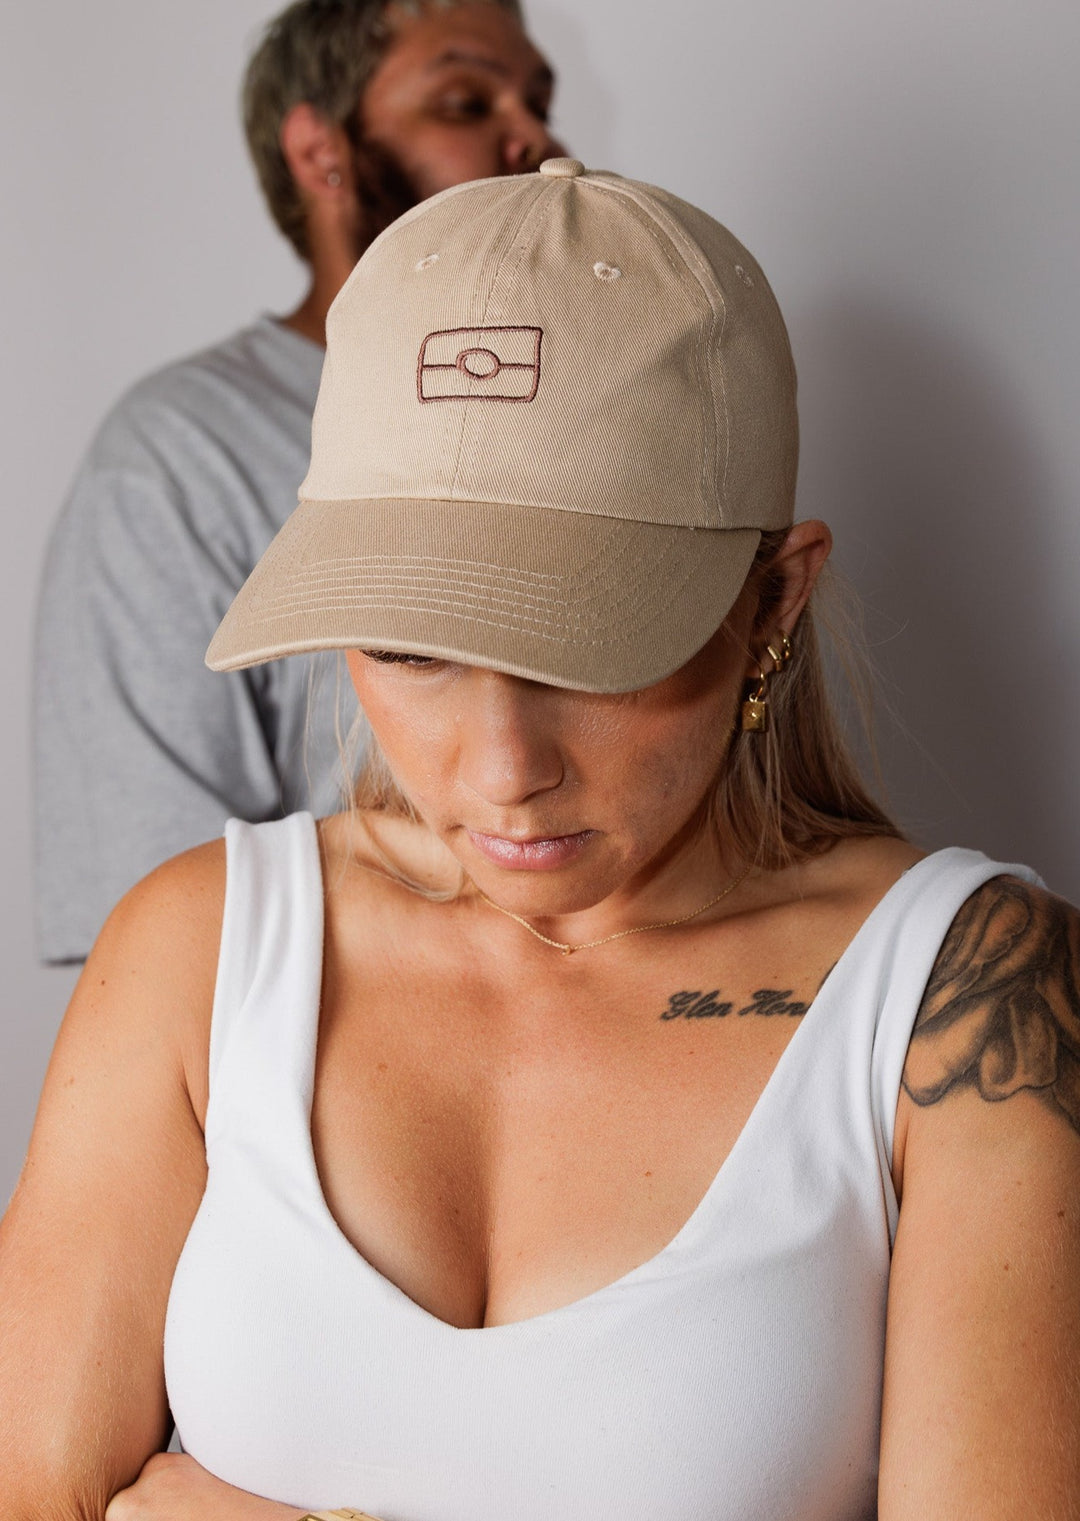 Clothing The Gaps. The OG 2.0 Cap. Beige adjustable cap. With embroidered brown outline of aboriginal flag on front. 'Wear your values' text embroidered on side of cap in same brown colour. Clothing The Gaps embroidered on back in brown stitching. Adjustable clip strap on back with silver clip featuring Clothing The Gaps logo.